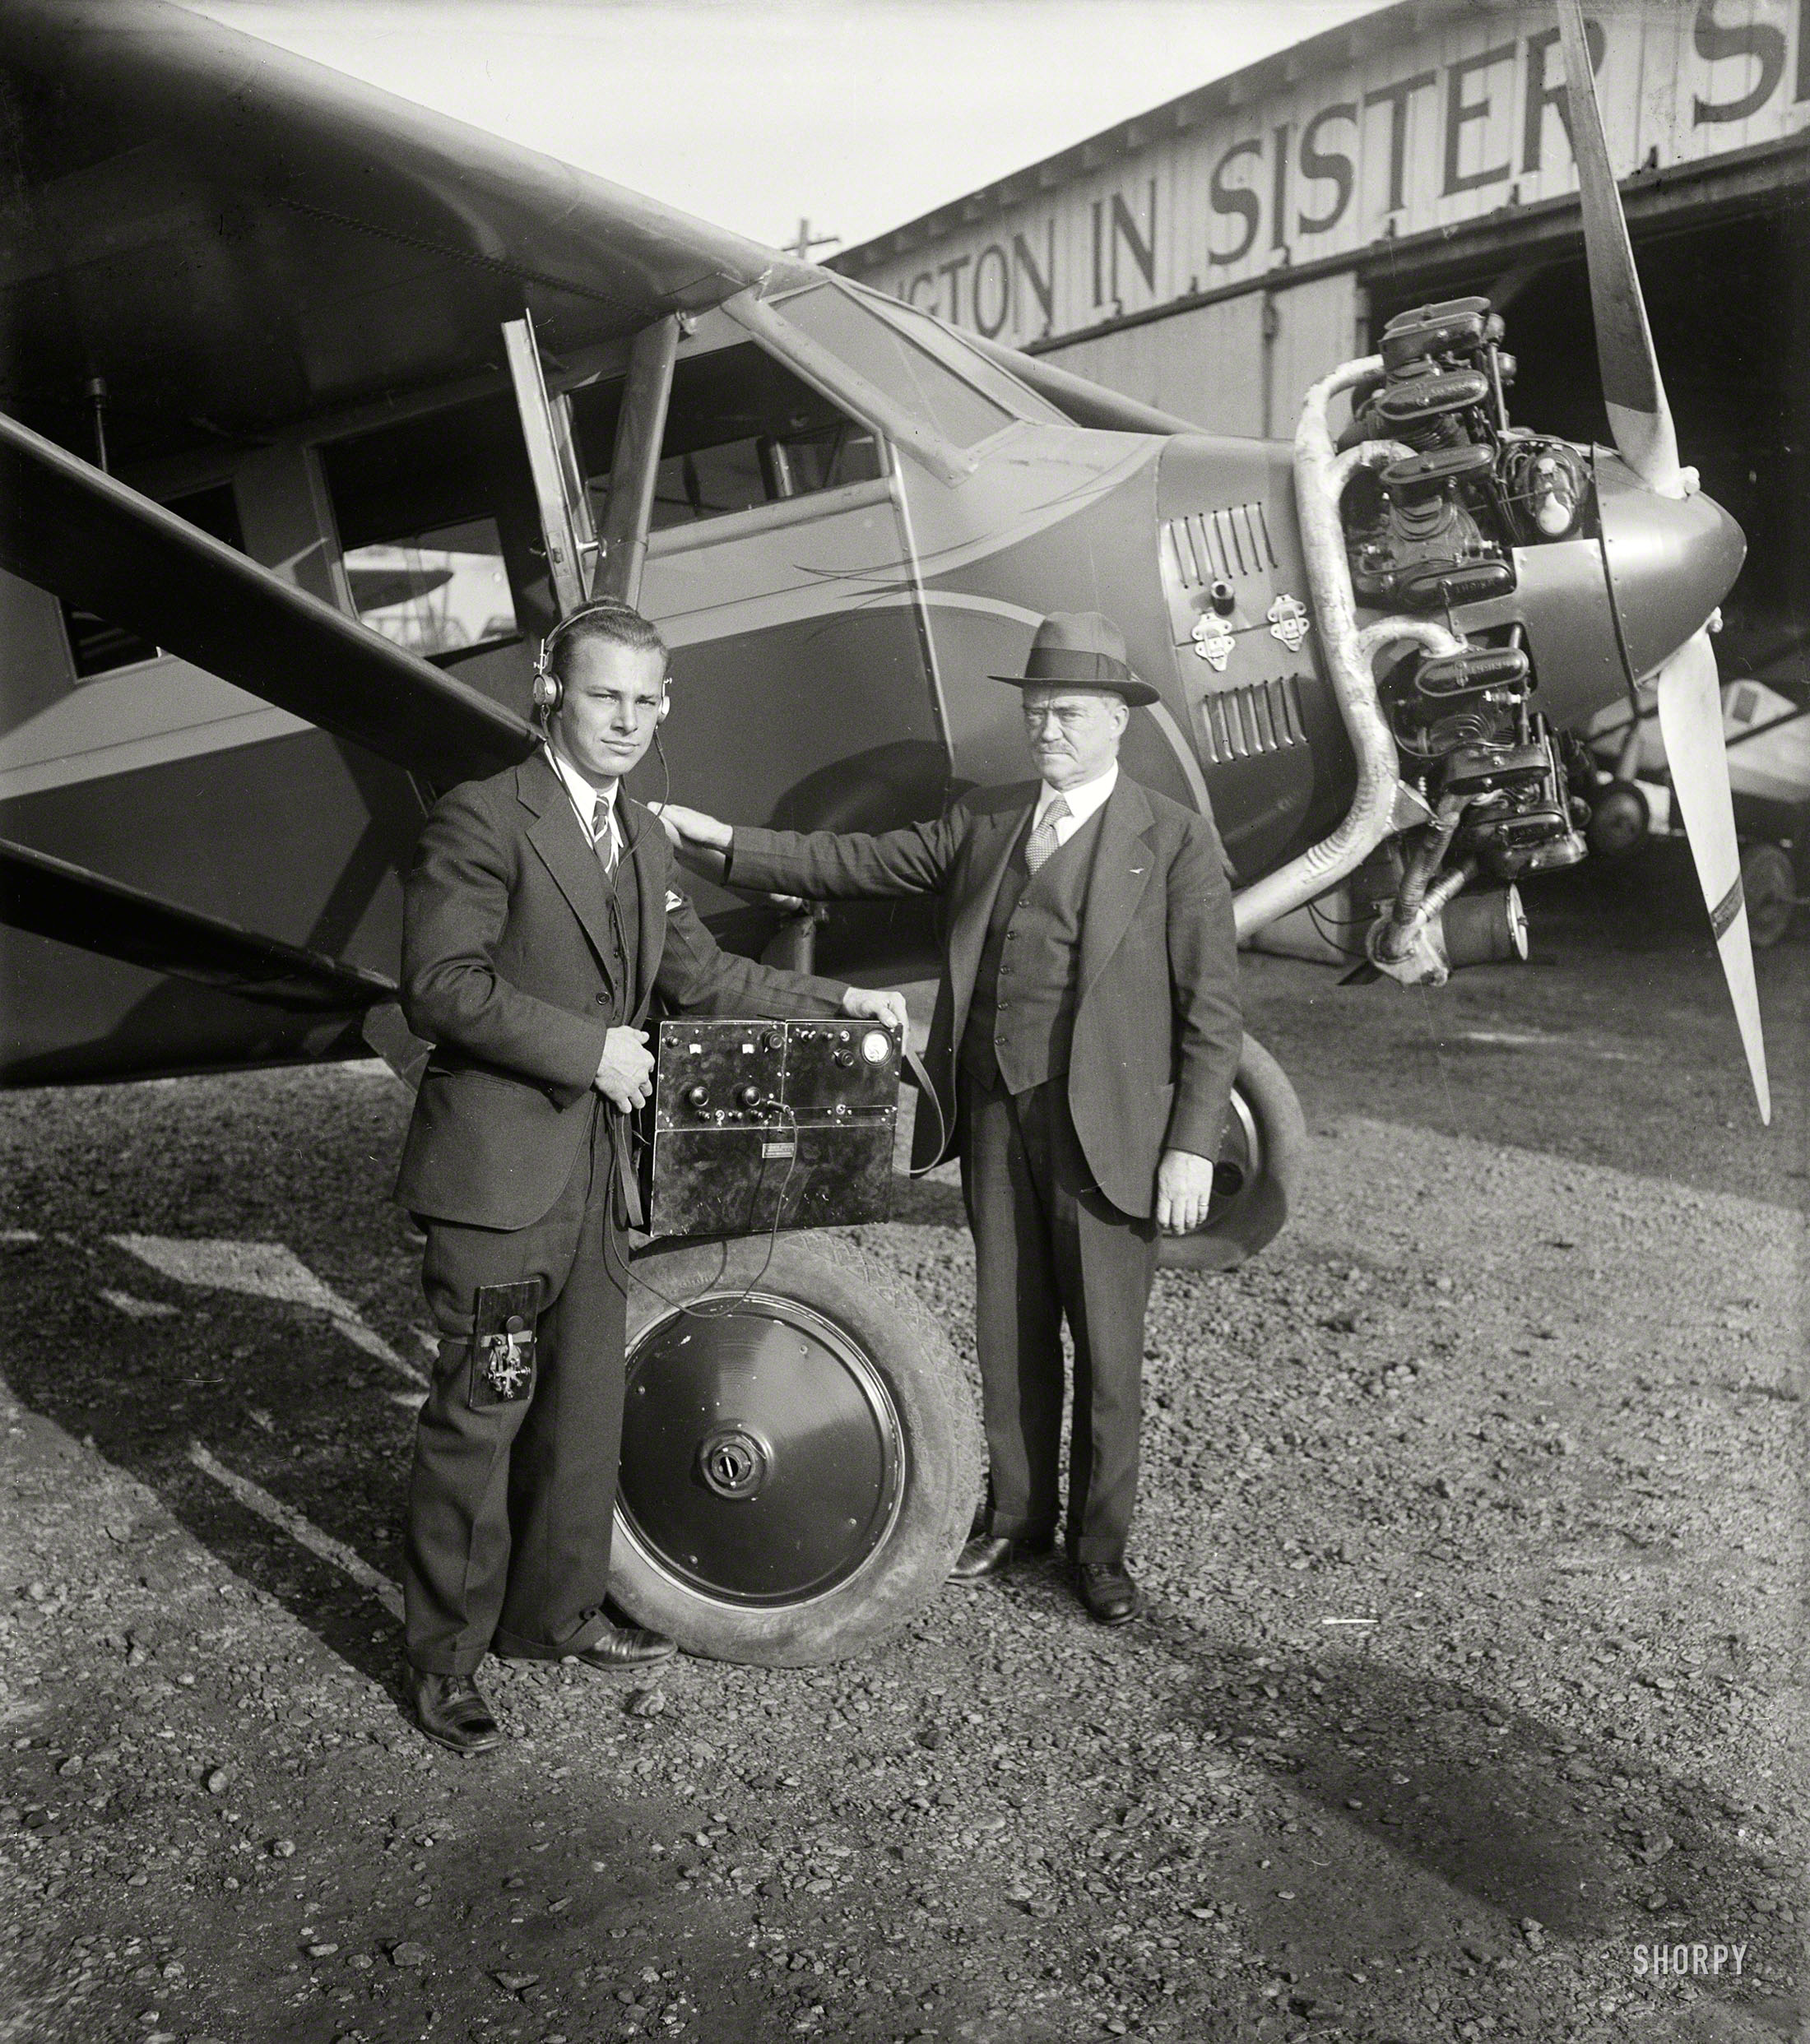 Dec. 5, 1929. Ignition interference from airplane engines on aircraft is largely a myth according to C. Francis Jenkins, Washington, D.C., inventor who has designed a radio receiving set which he says does not pick up noises from a flying power plant. In this photograph is shown Mr. Jenkins (right) and his laboratory assistant.
Video pioneer Francis Jenkins, seen here last week, and an anonymous protege who has a telegraph key strapped to his leg. By our reckoning this counts as early mobile texting. Harris & Ewing Collection glass negative. View full size.